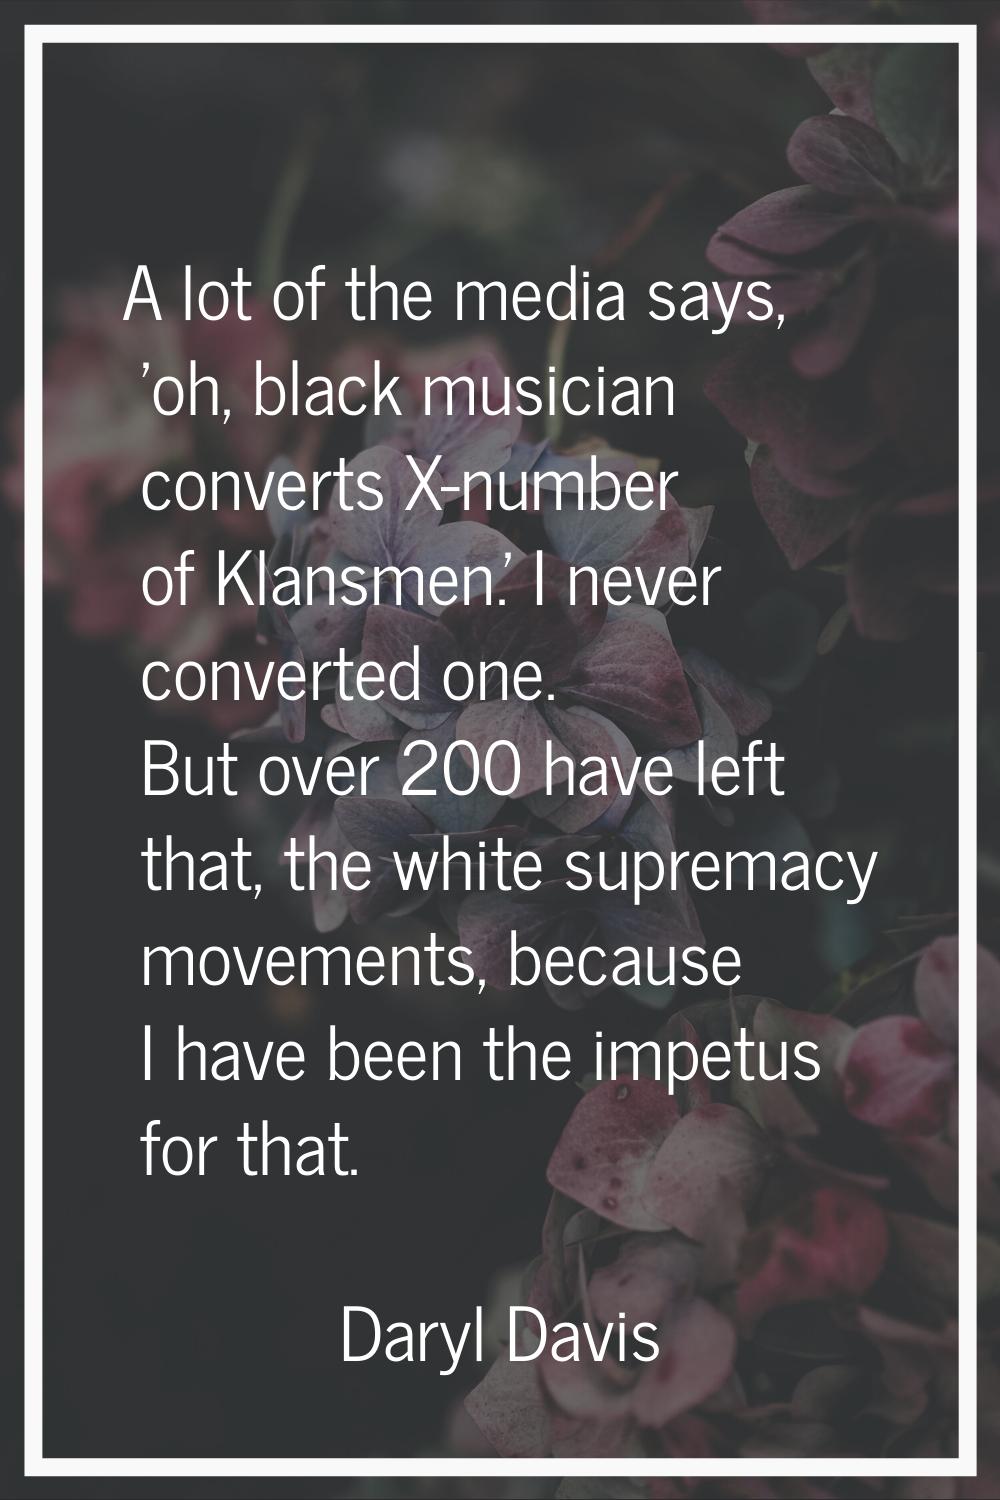 A lot of the media says, 'oh, black musician converts X-number of Klansmen.' I never converted one.